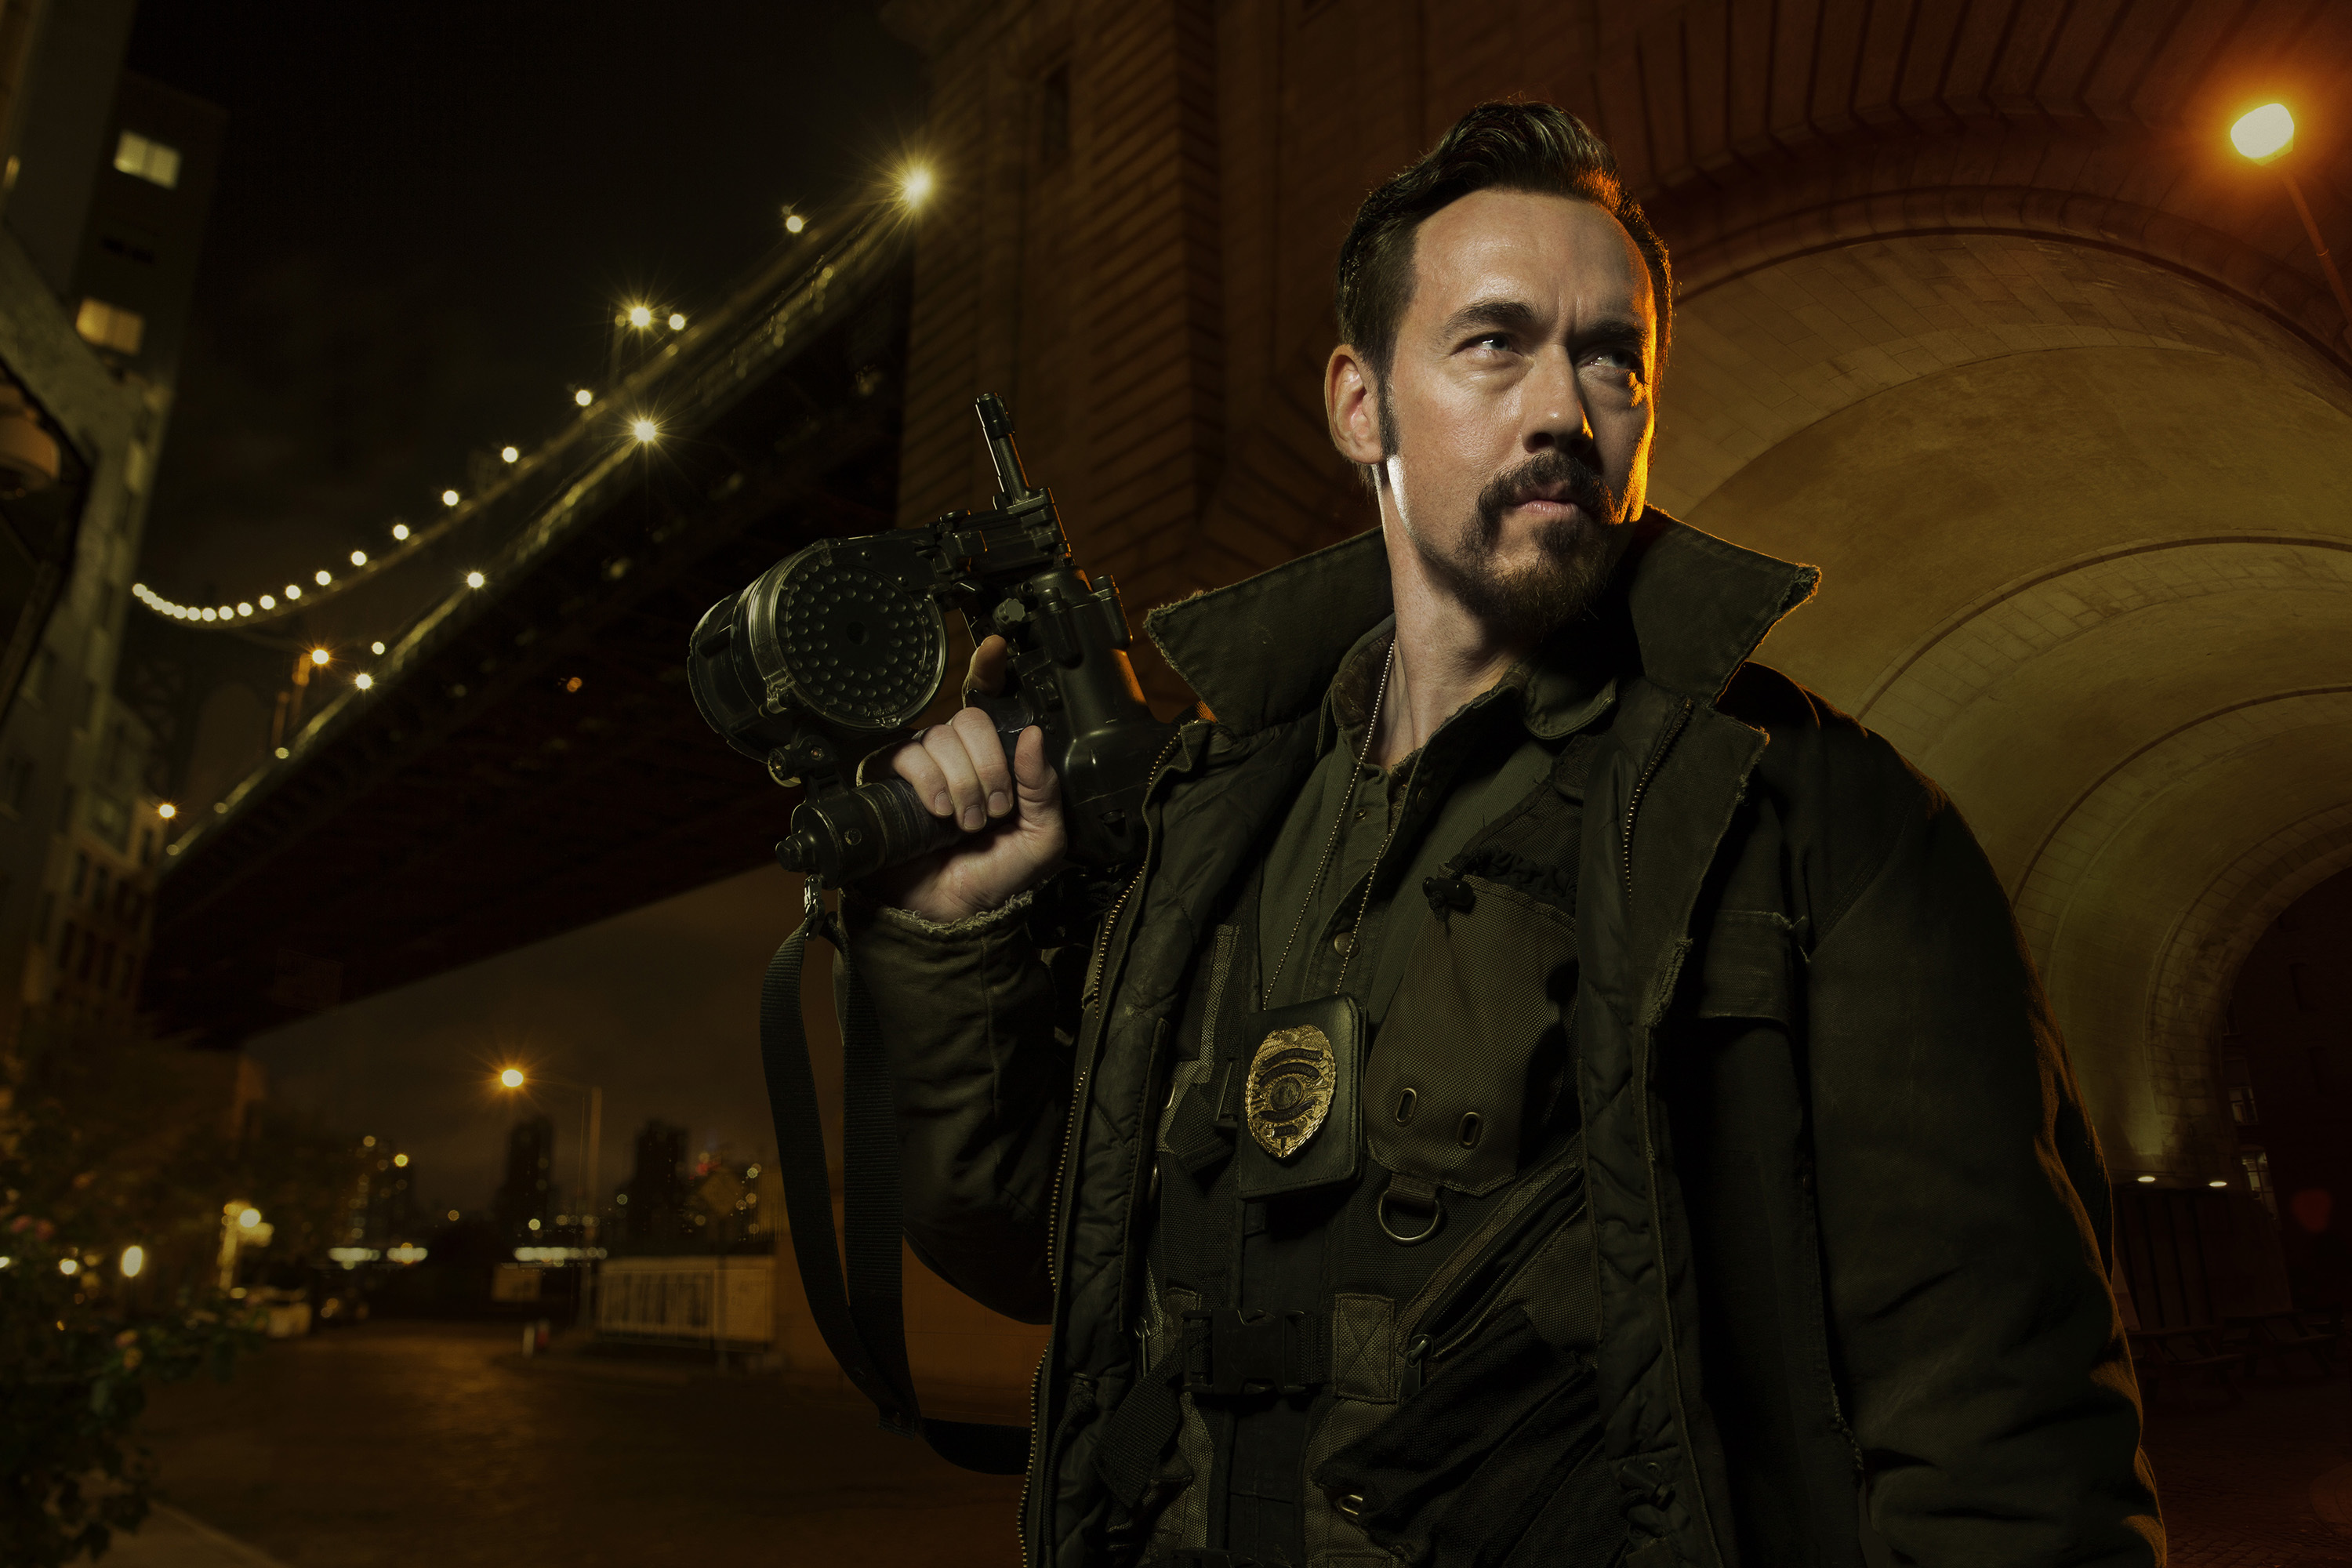 THE STRAIN -- Pictured: Kevin Durand as Vasiliy Fet. CR. Robert Sebree/FX